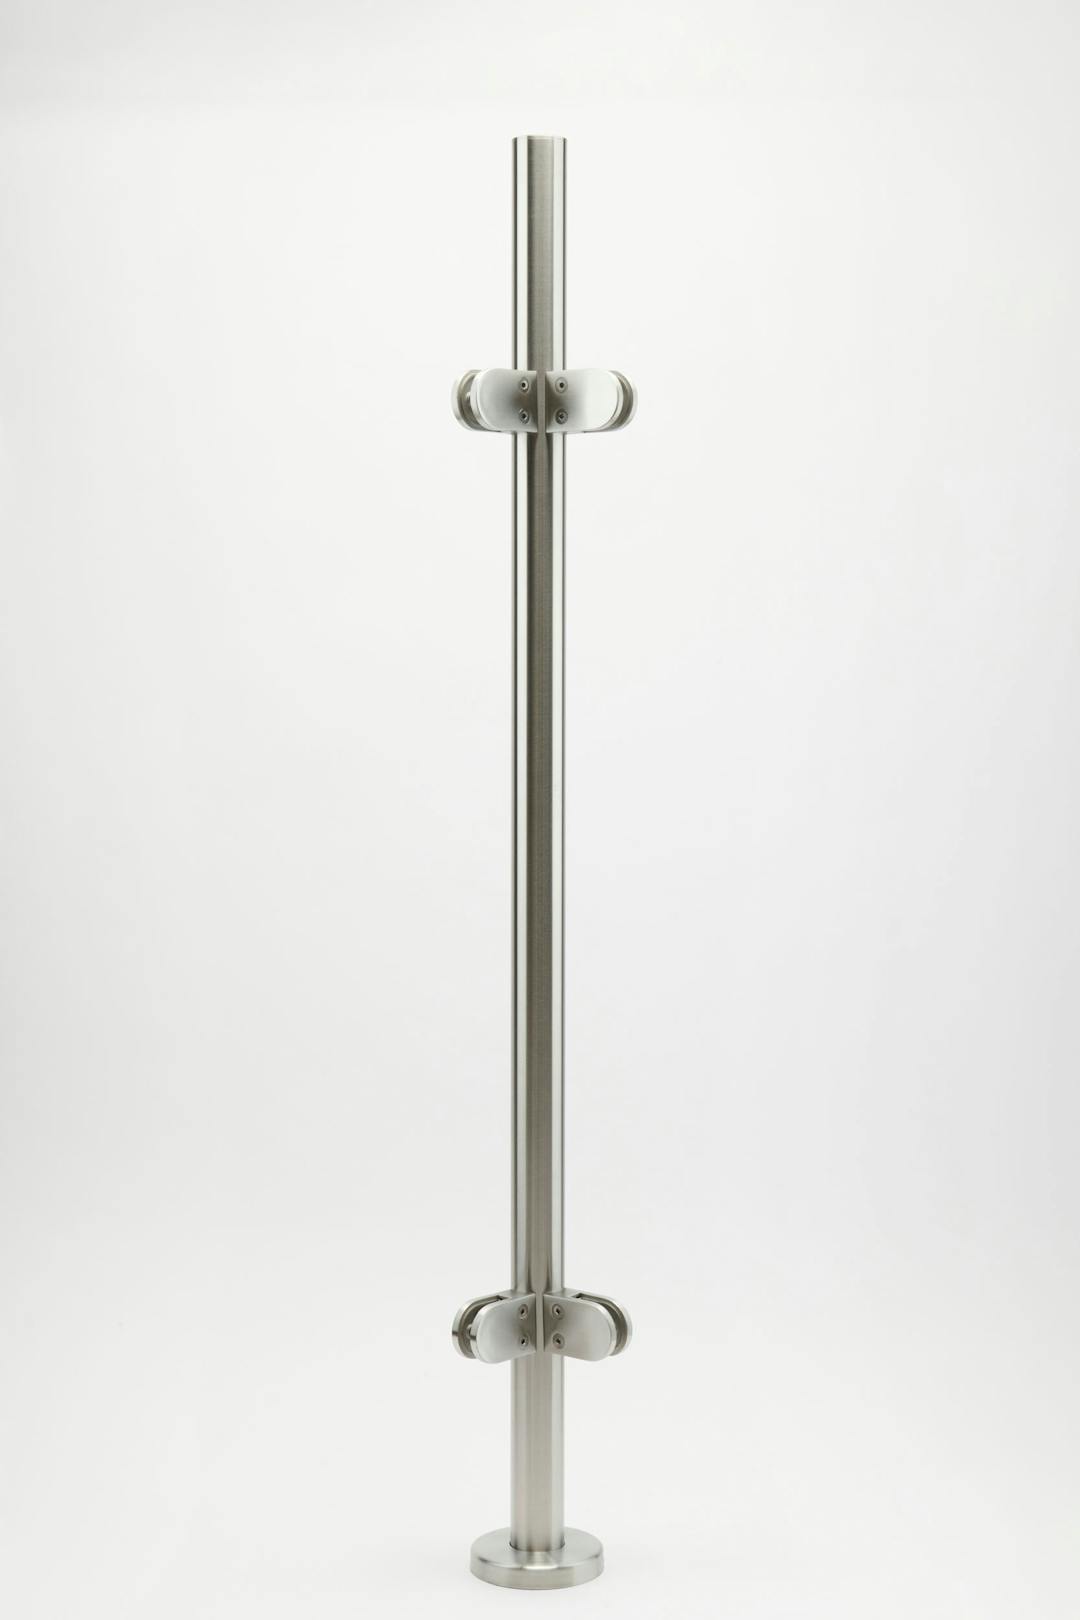 Mirror Polished Corner Post with End Cap